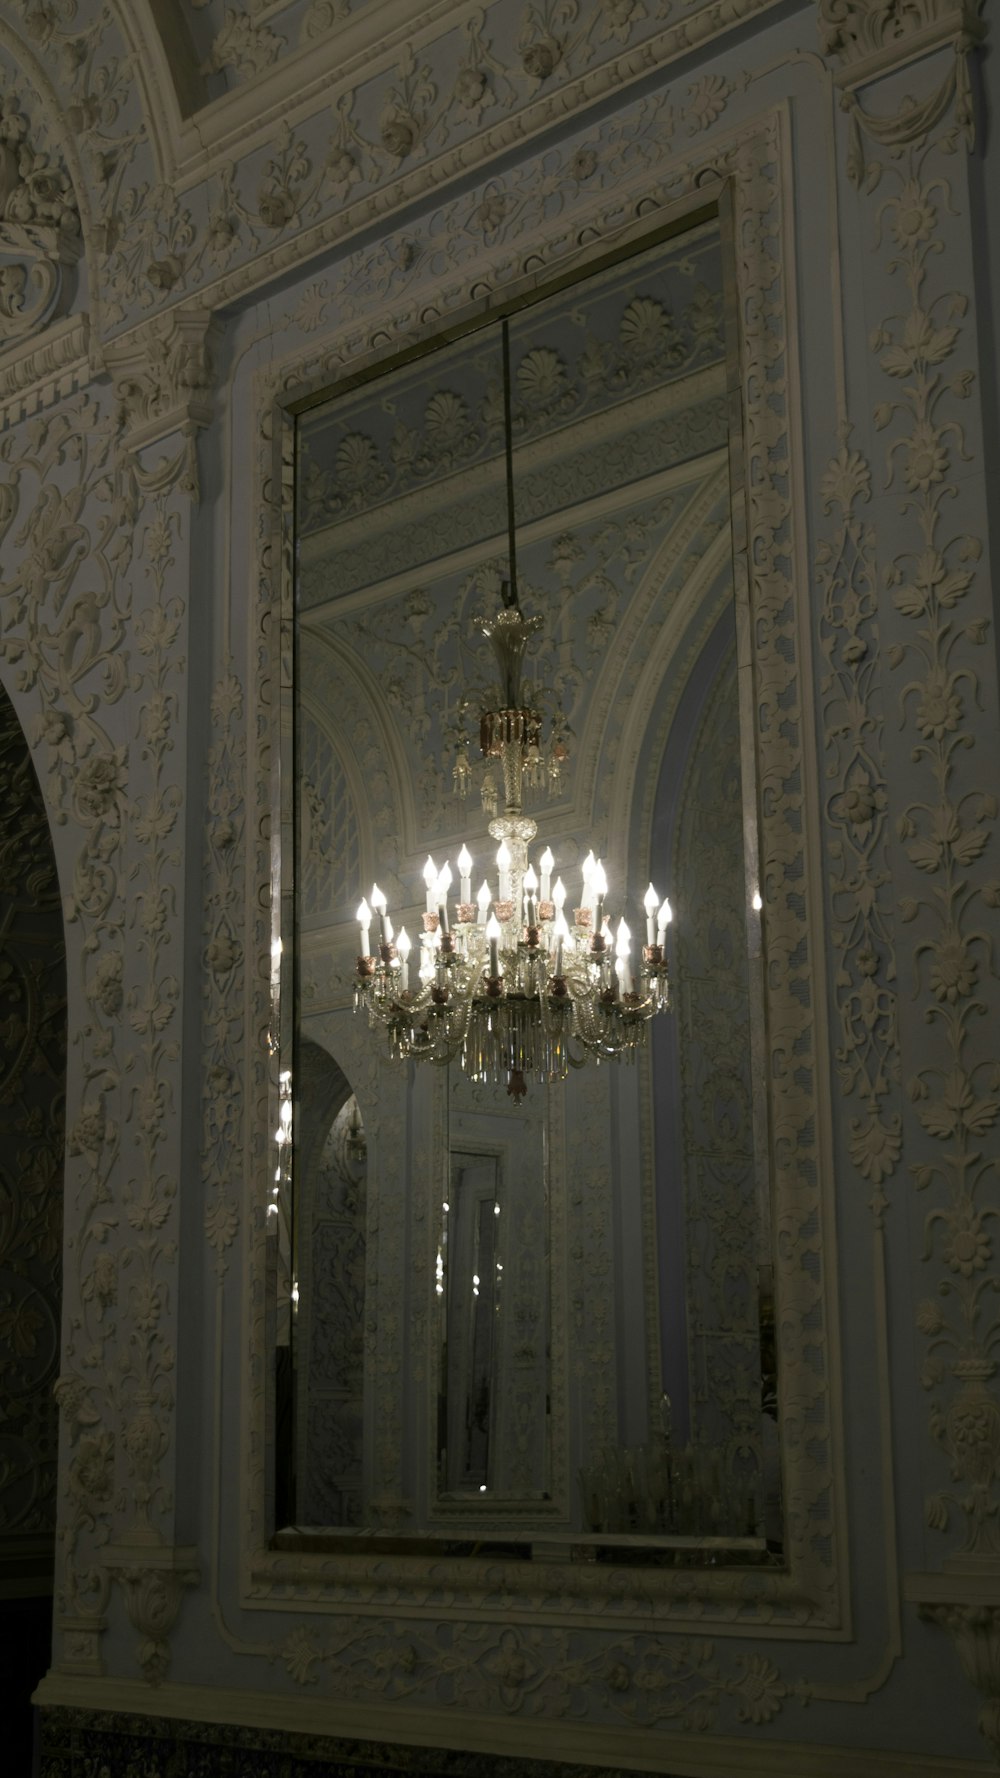 a chandelier from a ceiling